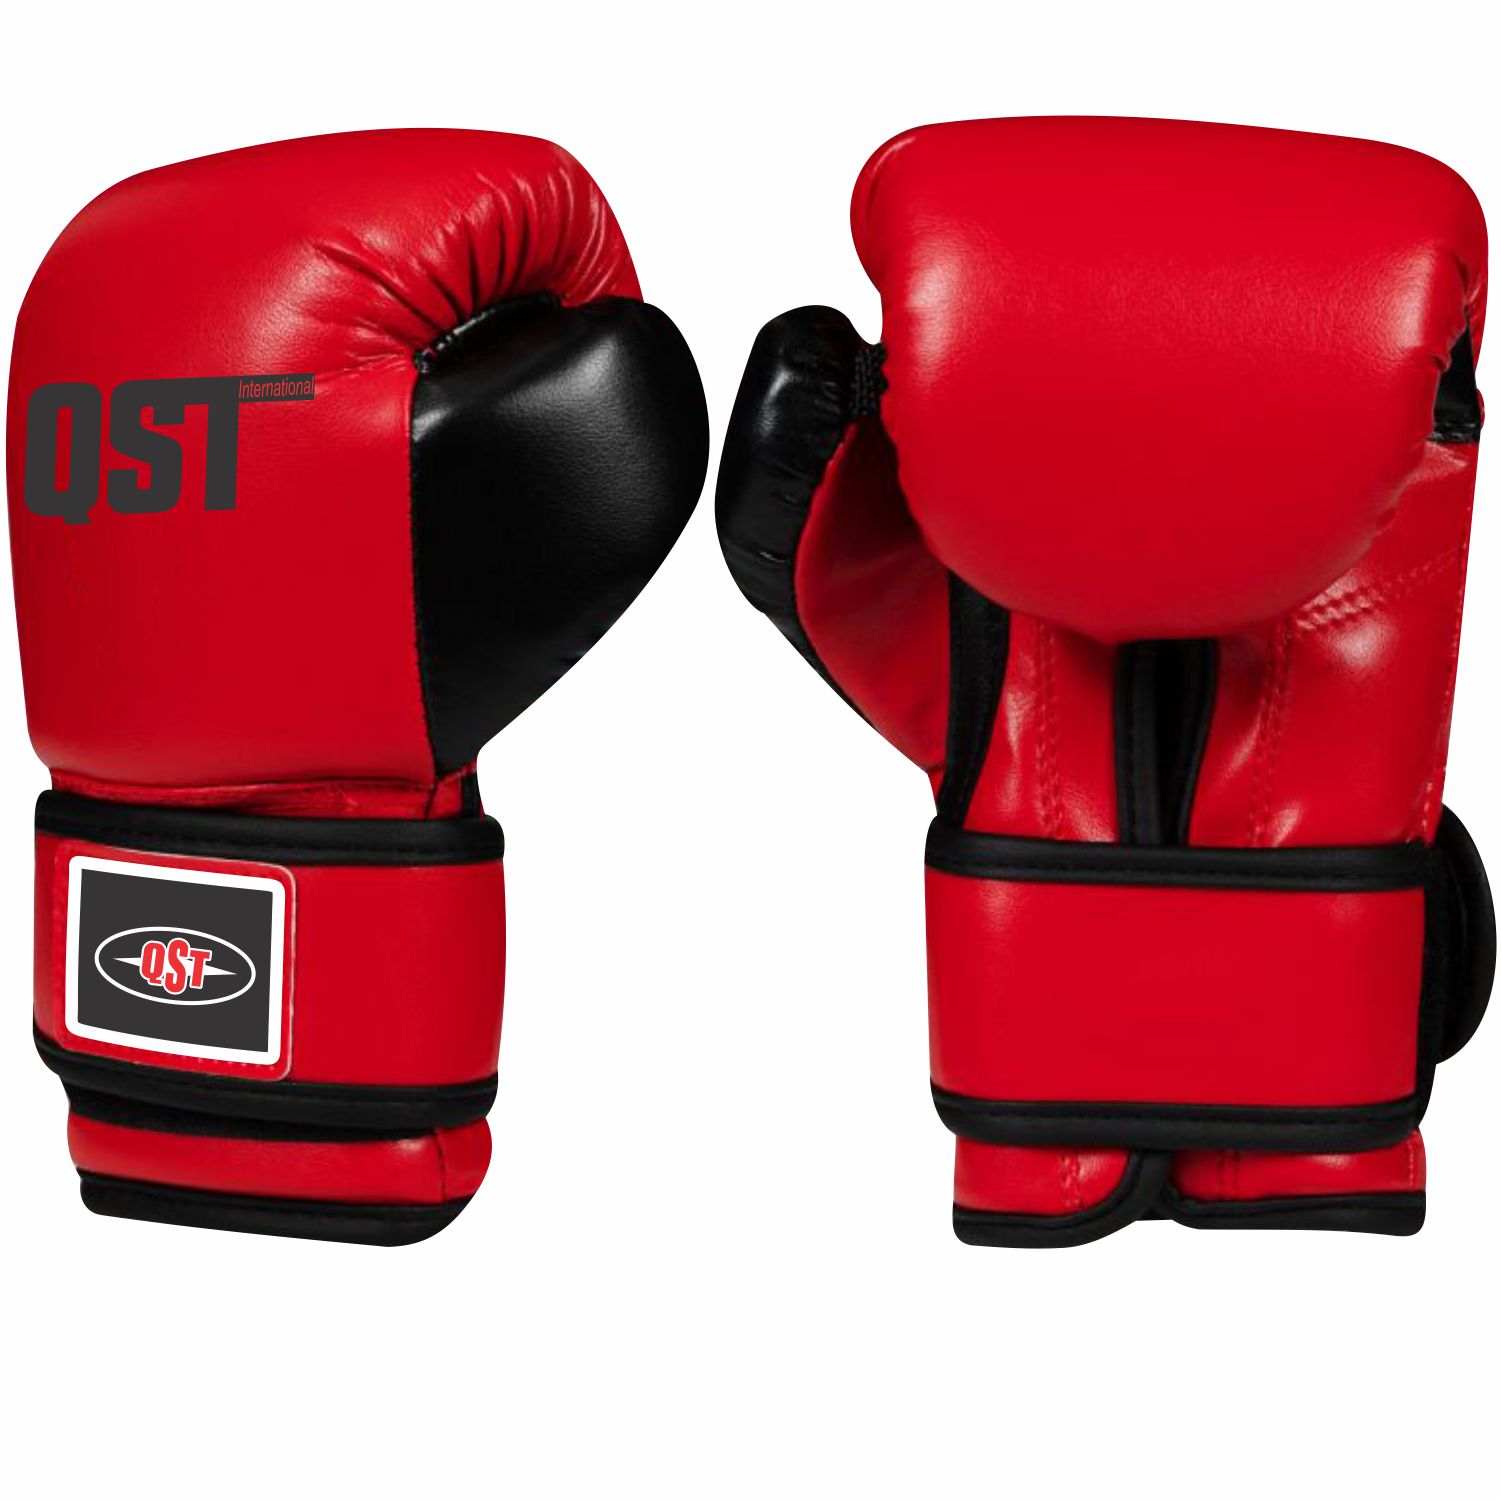 Professional Boxing Gloves - PRG-1524